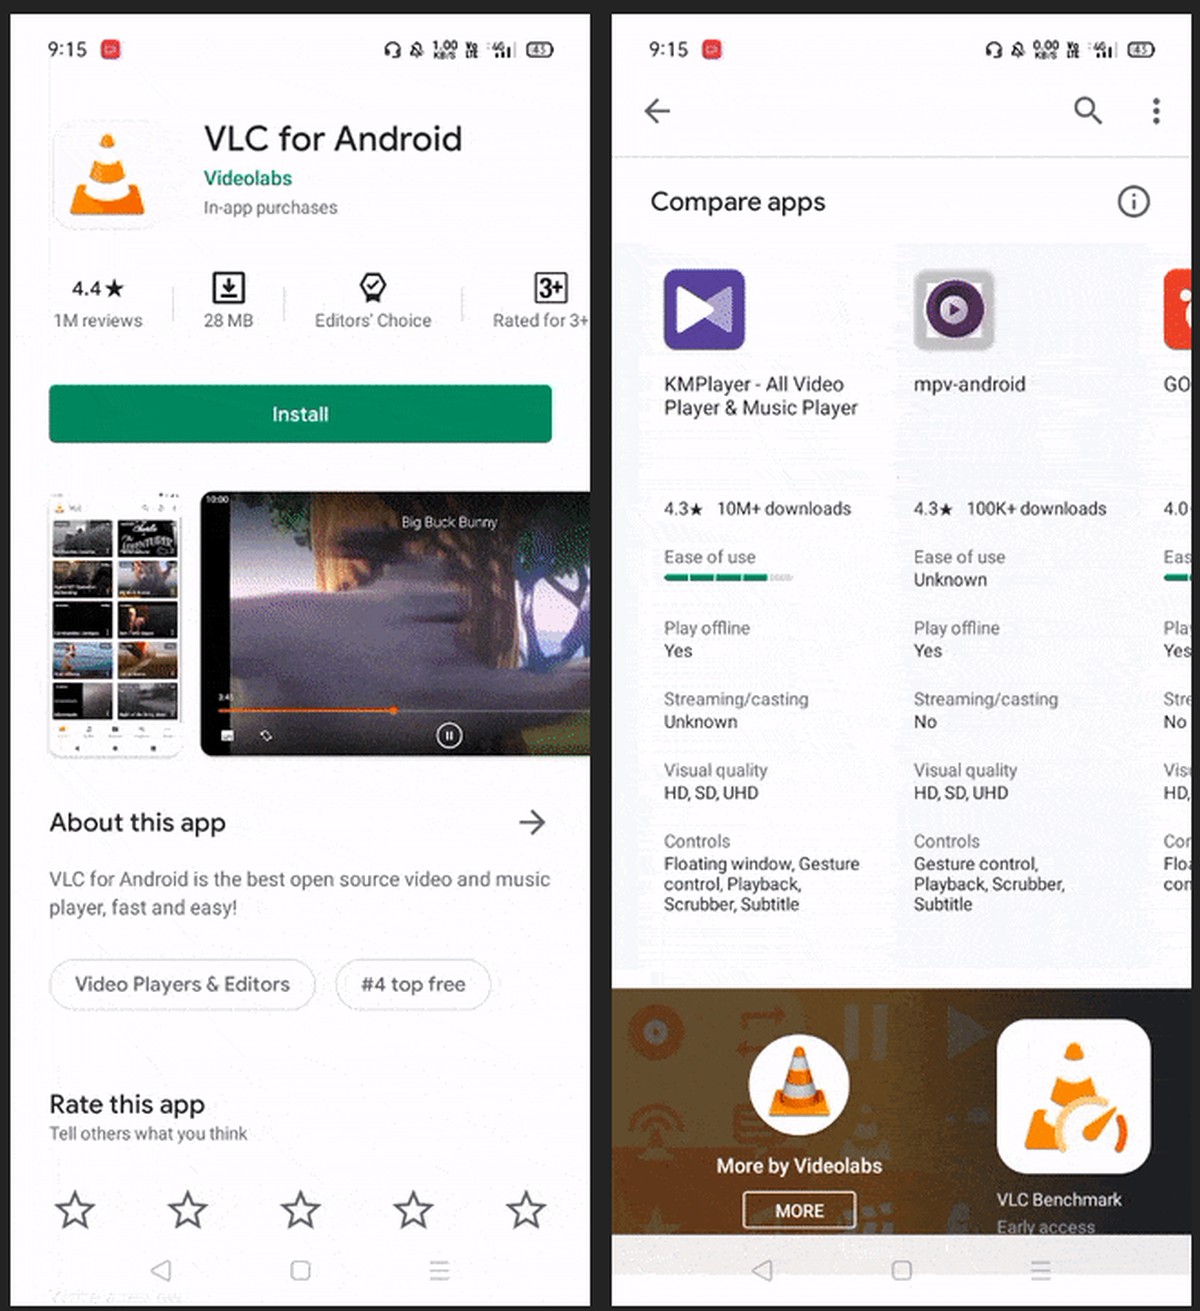 Google Play Compare apps screen